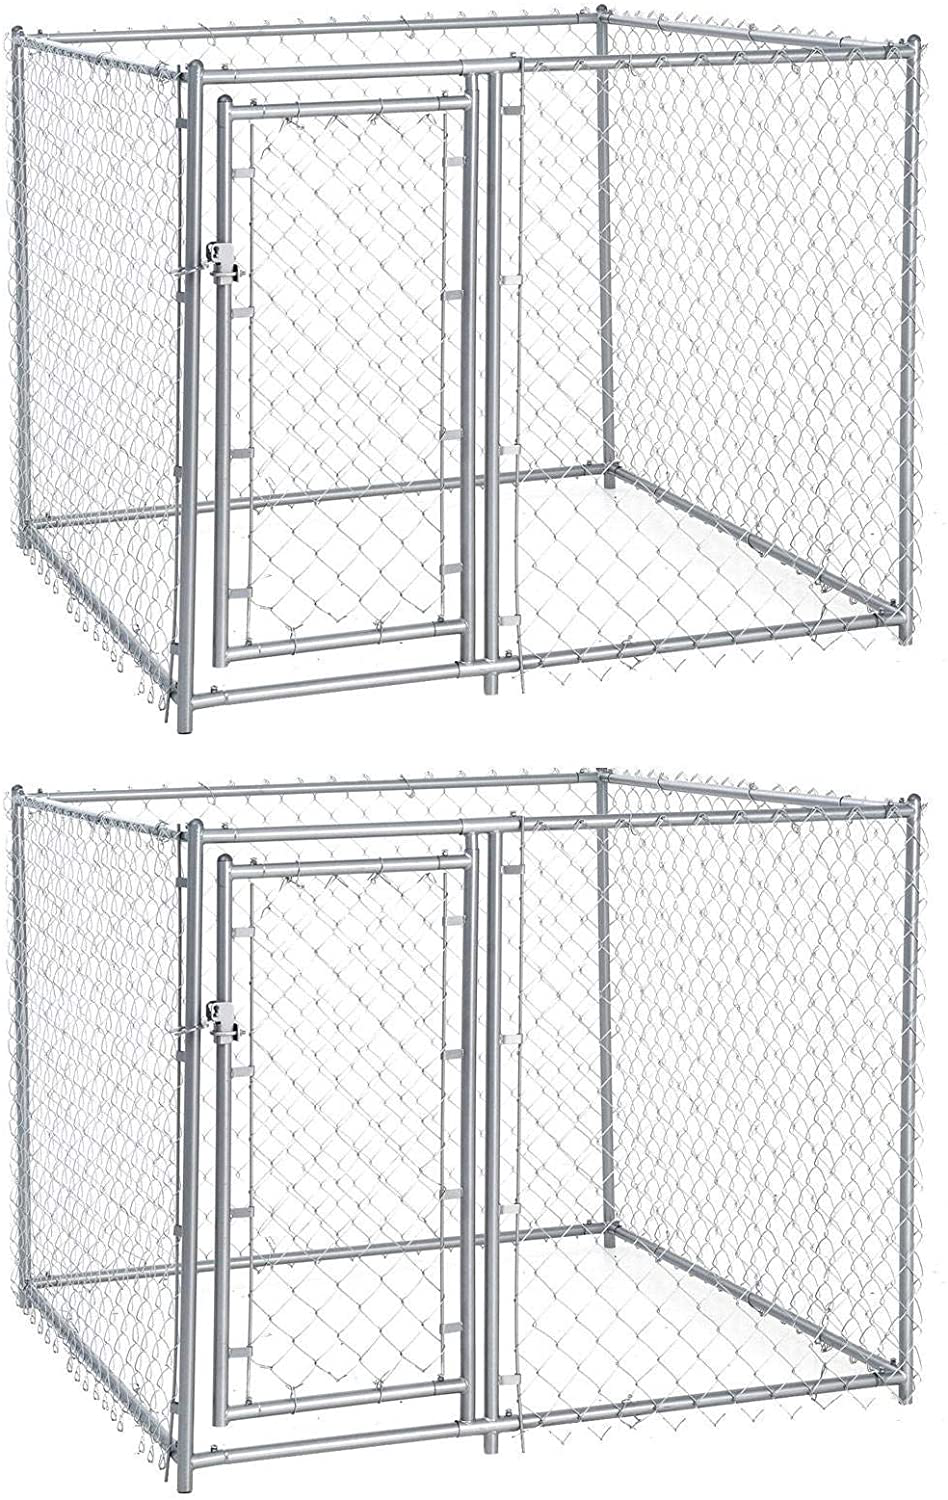 Lucky Dog 5 X 5 X 4 Foot Heavy Duty Outdoor Chain Link Dog Kennel (2 Pack) Animals & Pet Supplies > Pet Supplies > Dog Supplies > Dog Kennels & Runs Lucky Dog   